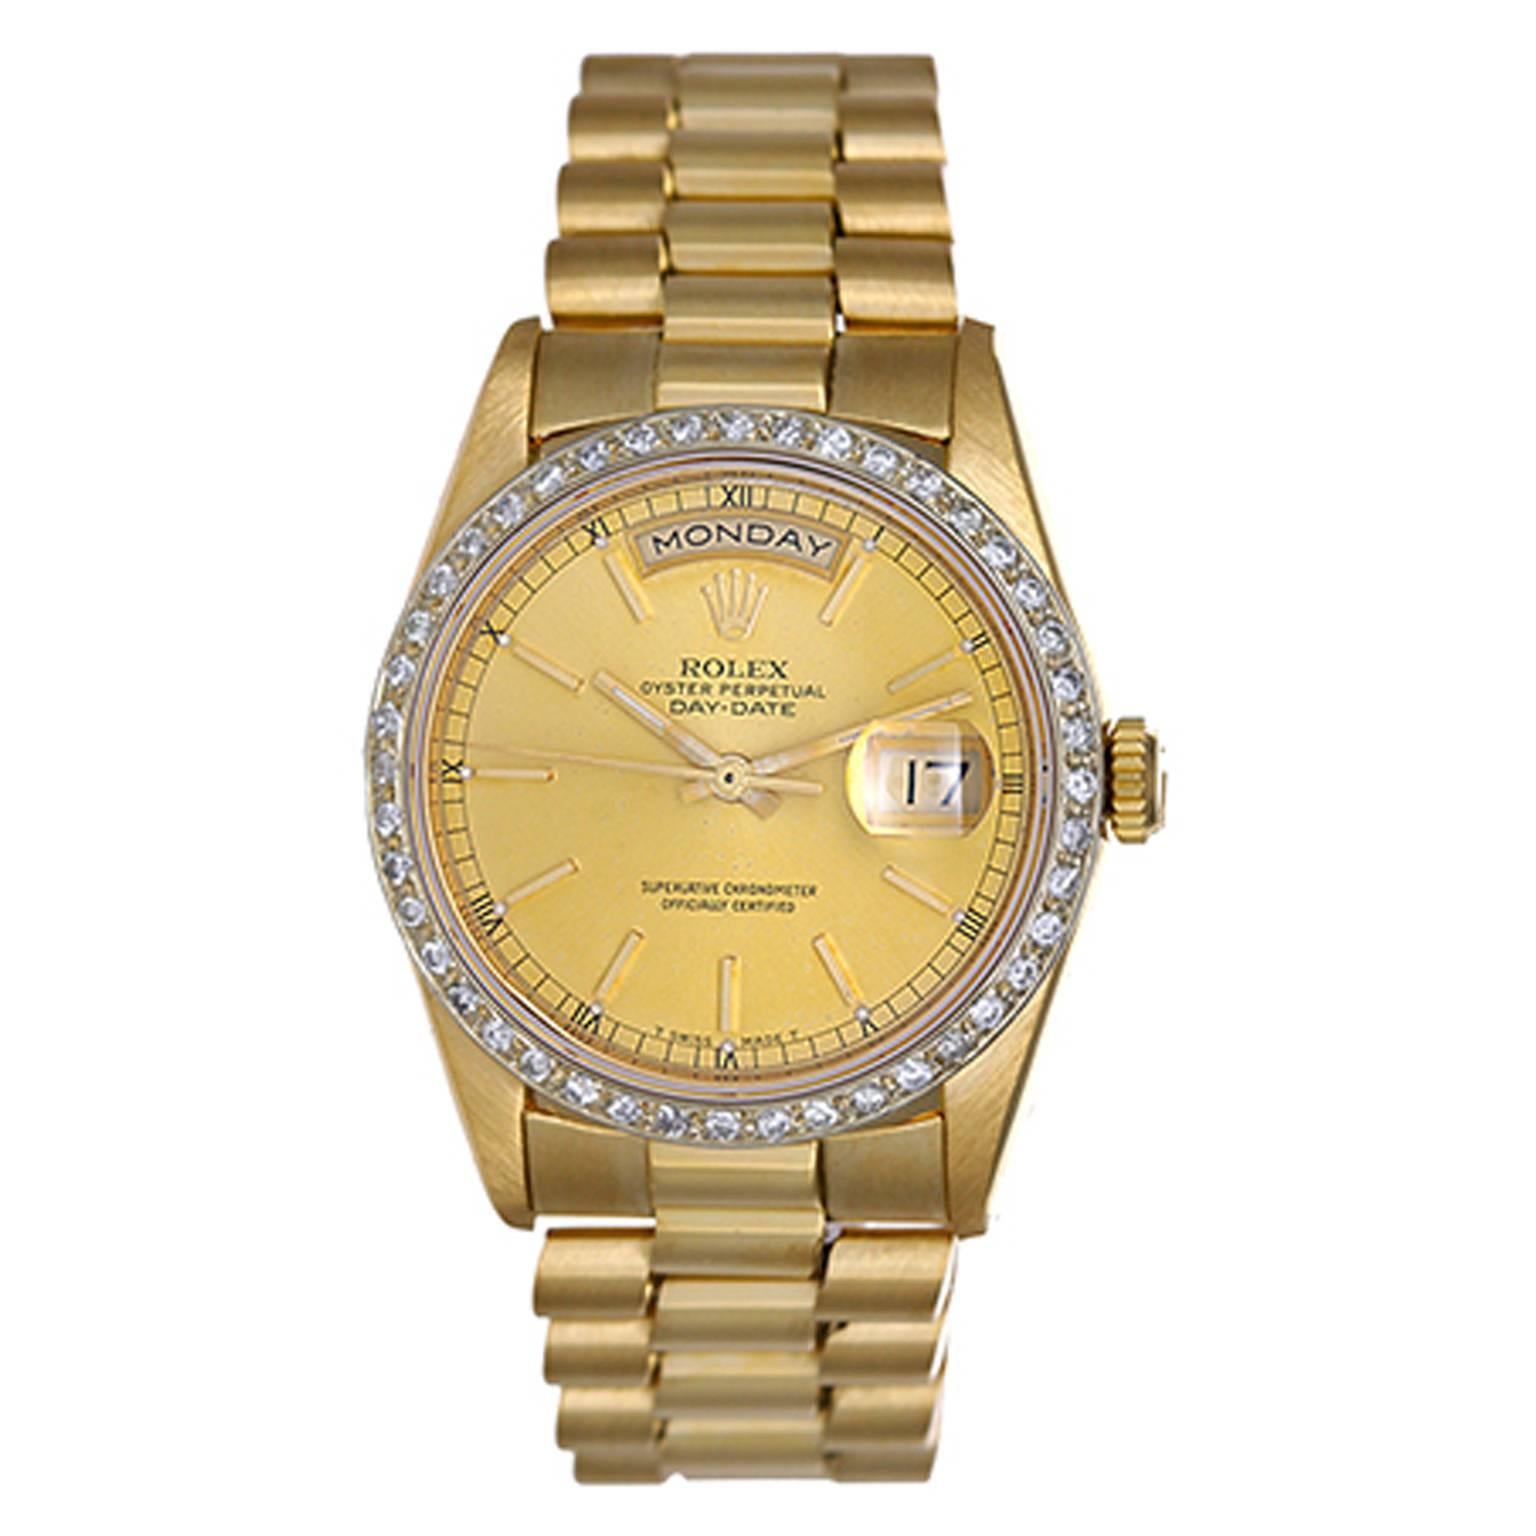 Rolex yellow gold President Day-Date Champagne dial Automatic wristwatch 